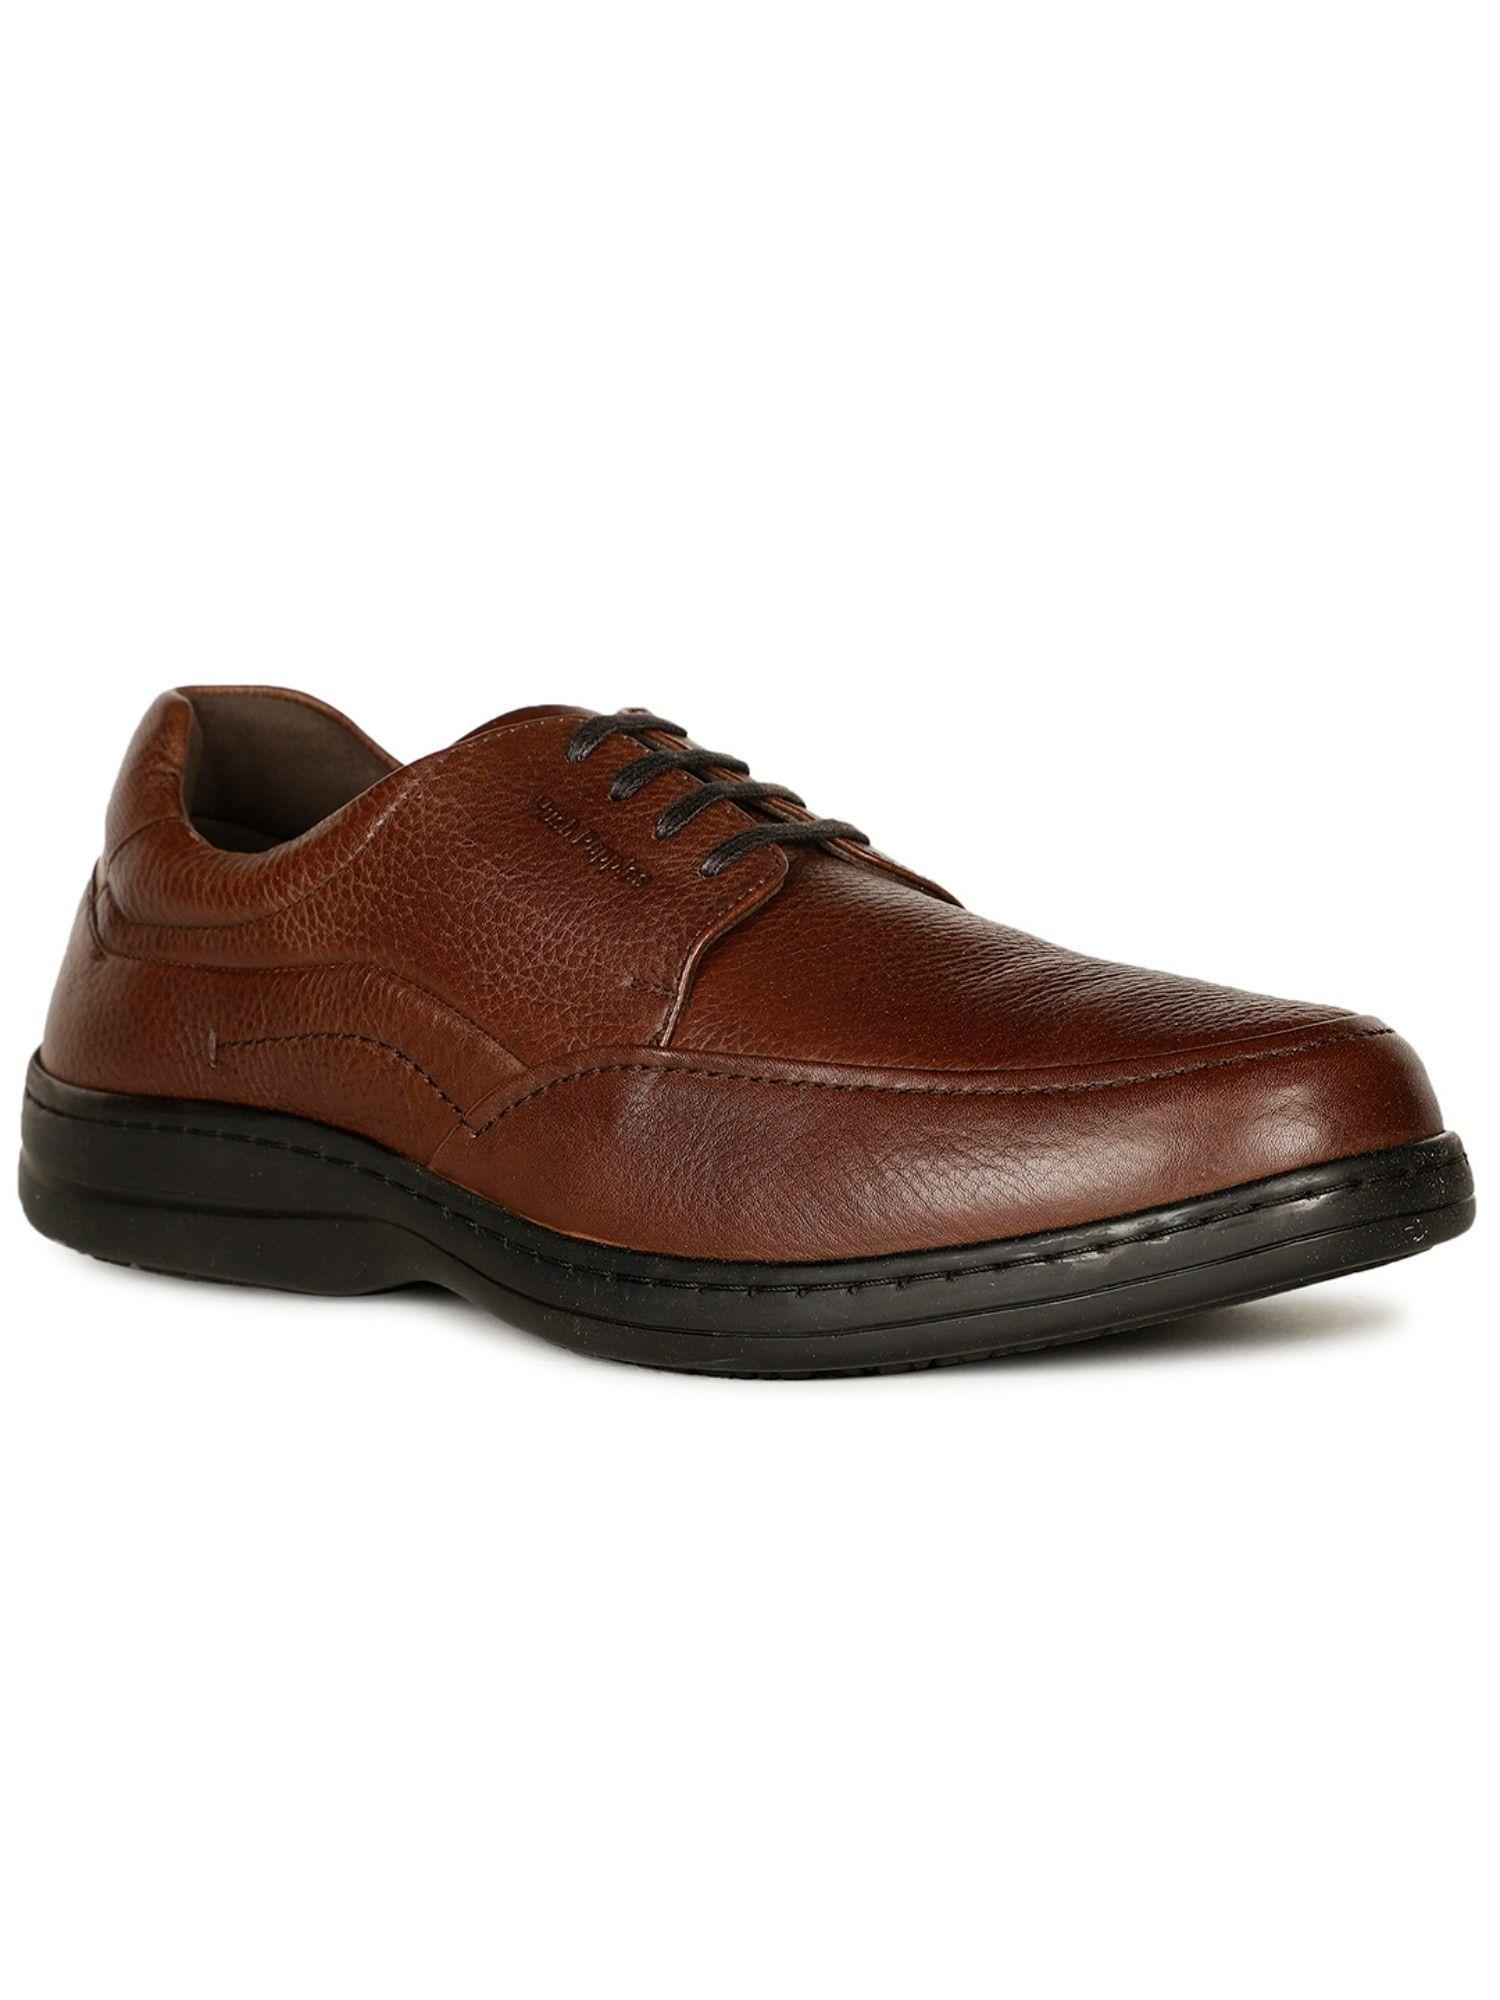 street derby lace up for men (brown)